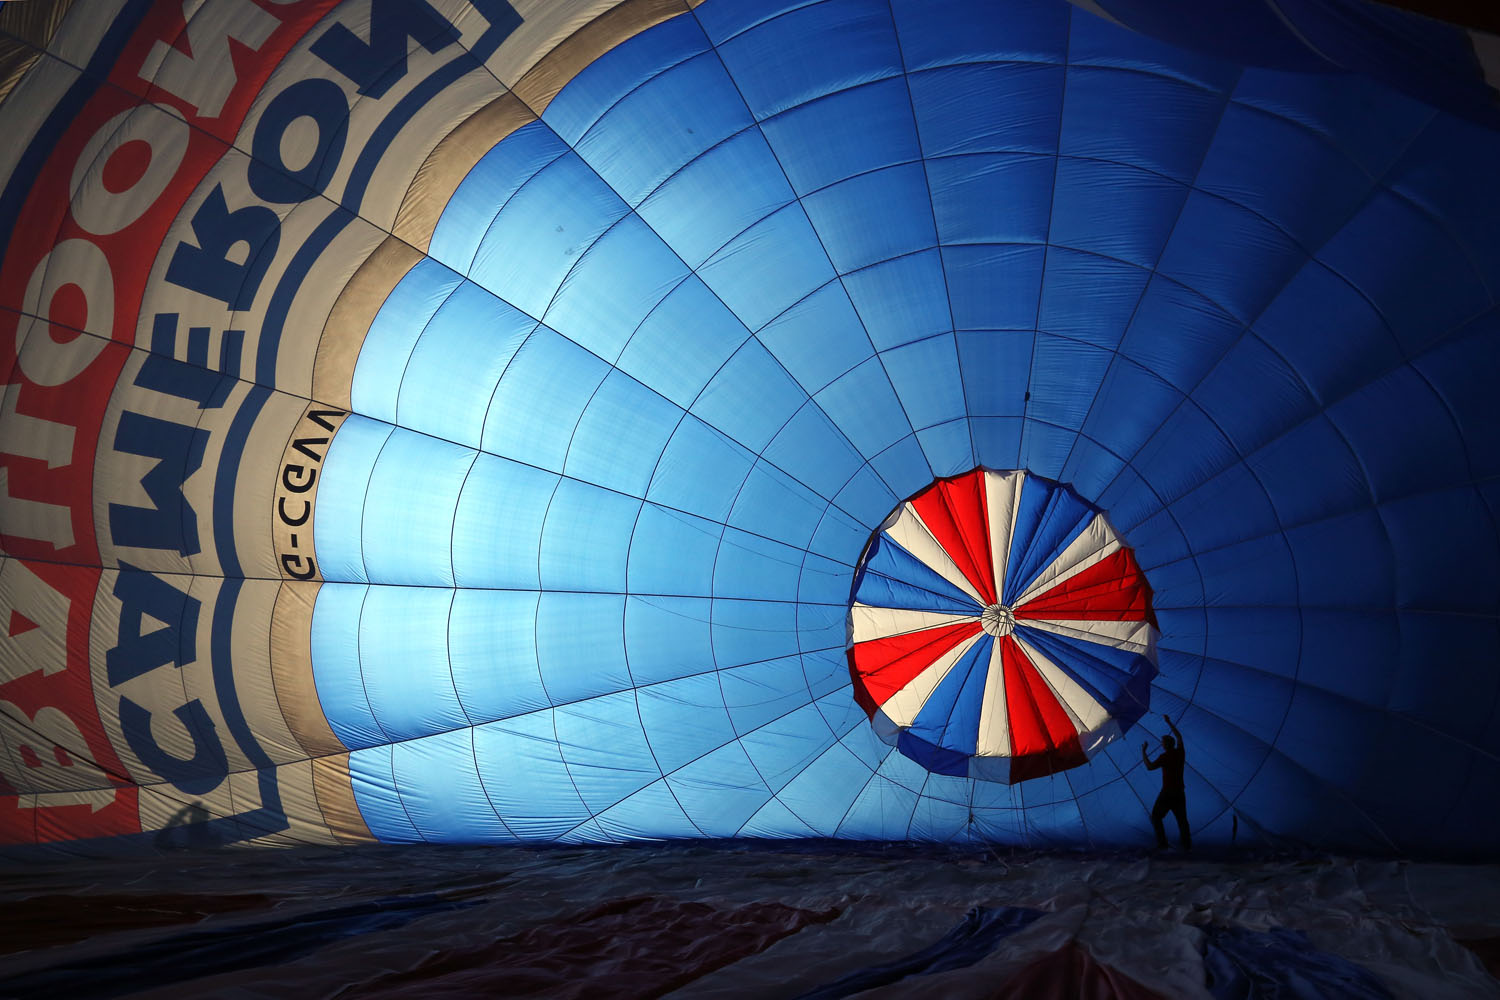 Balloonists Take To The Skies For The Bristol International Balloon Festival